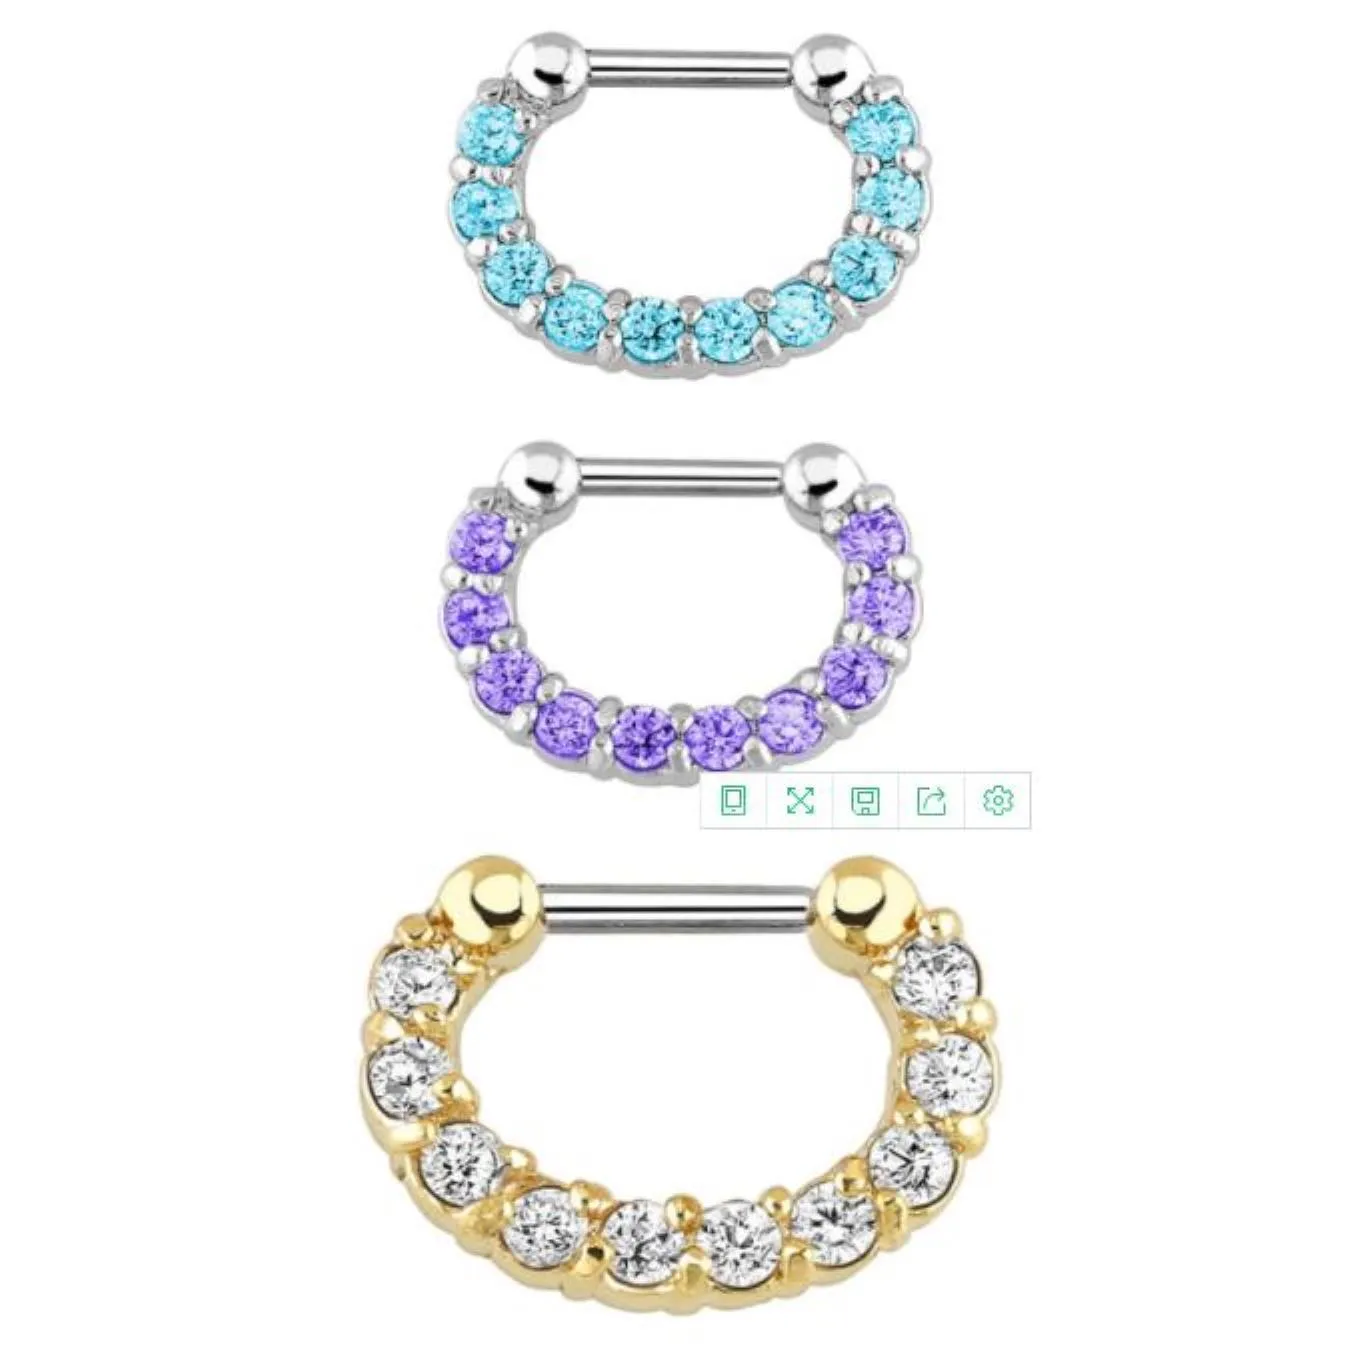 30Pcs Rhinestone Crystal Nose Hoops Unisex Surgical Steel Cz Septum Clicker Nose Ring Piercing Body Jewelry